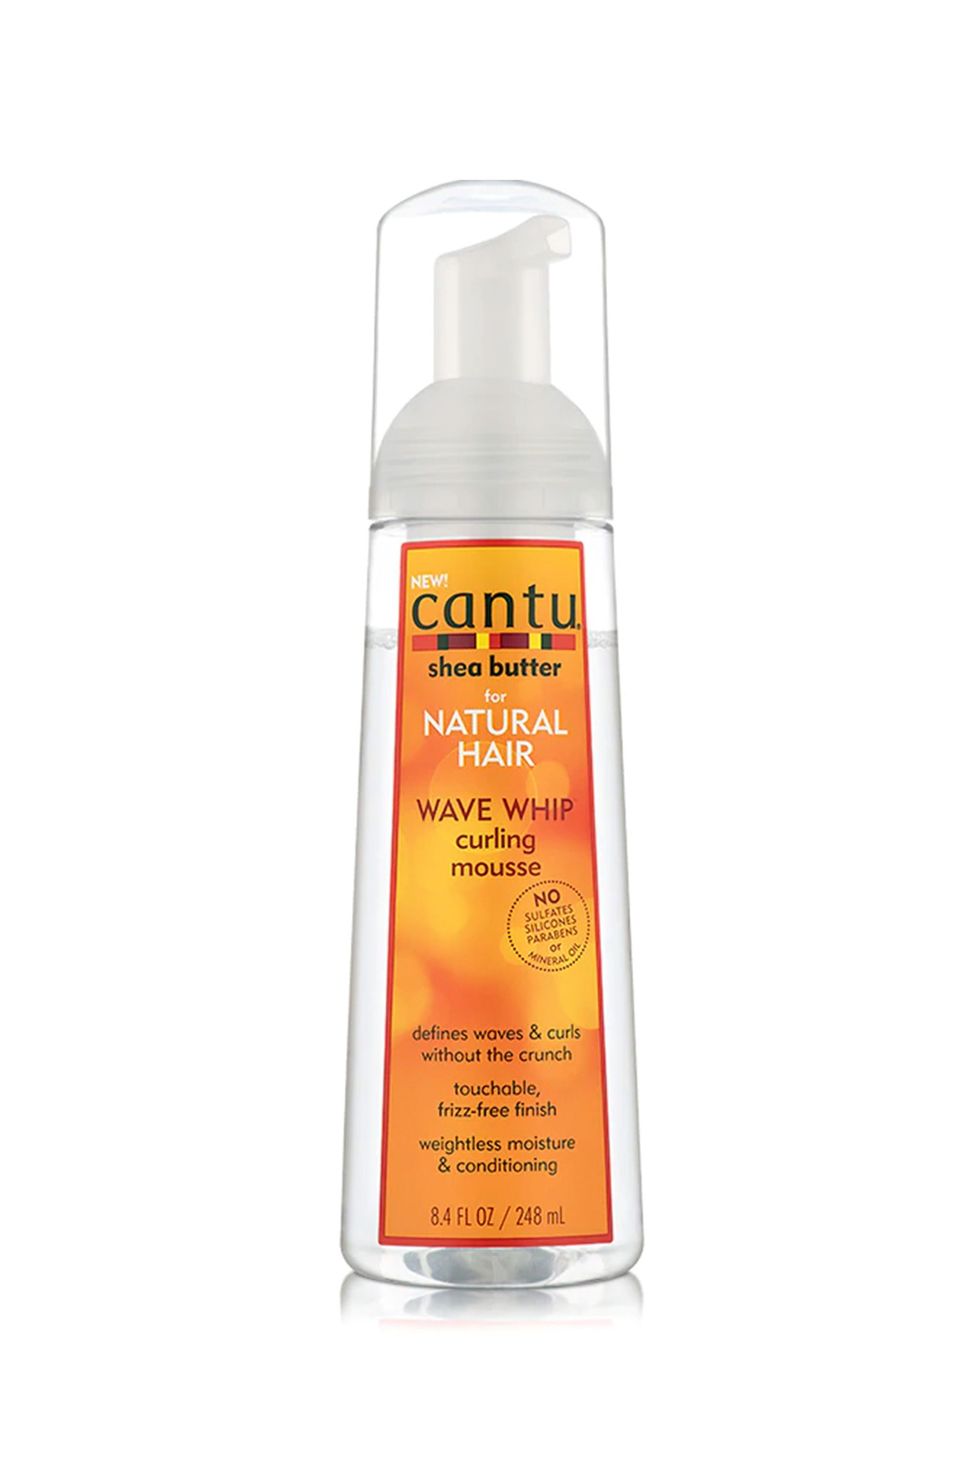 Cantu Shea Butter for Natural Hair Wave Whip Curling Mousse